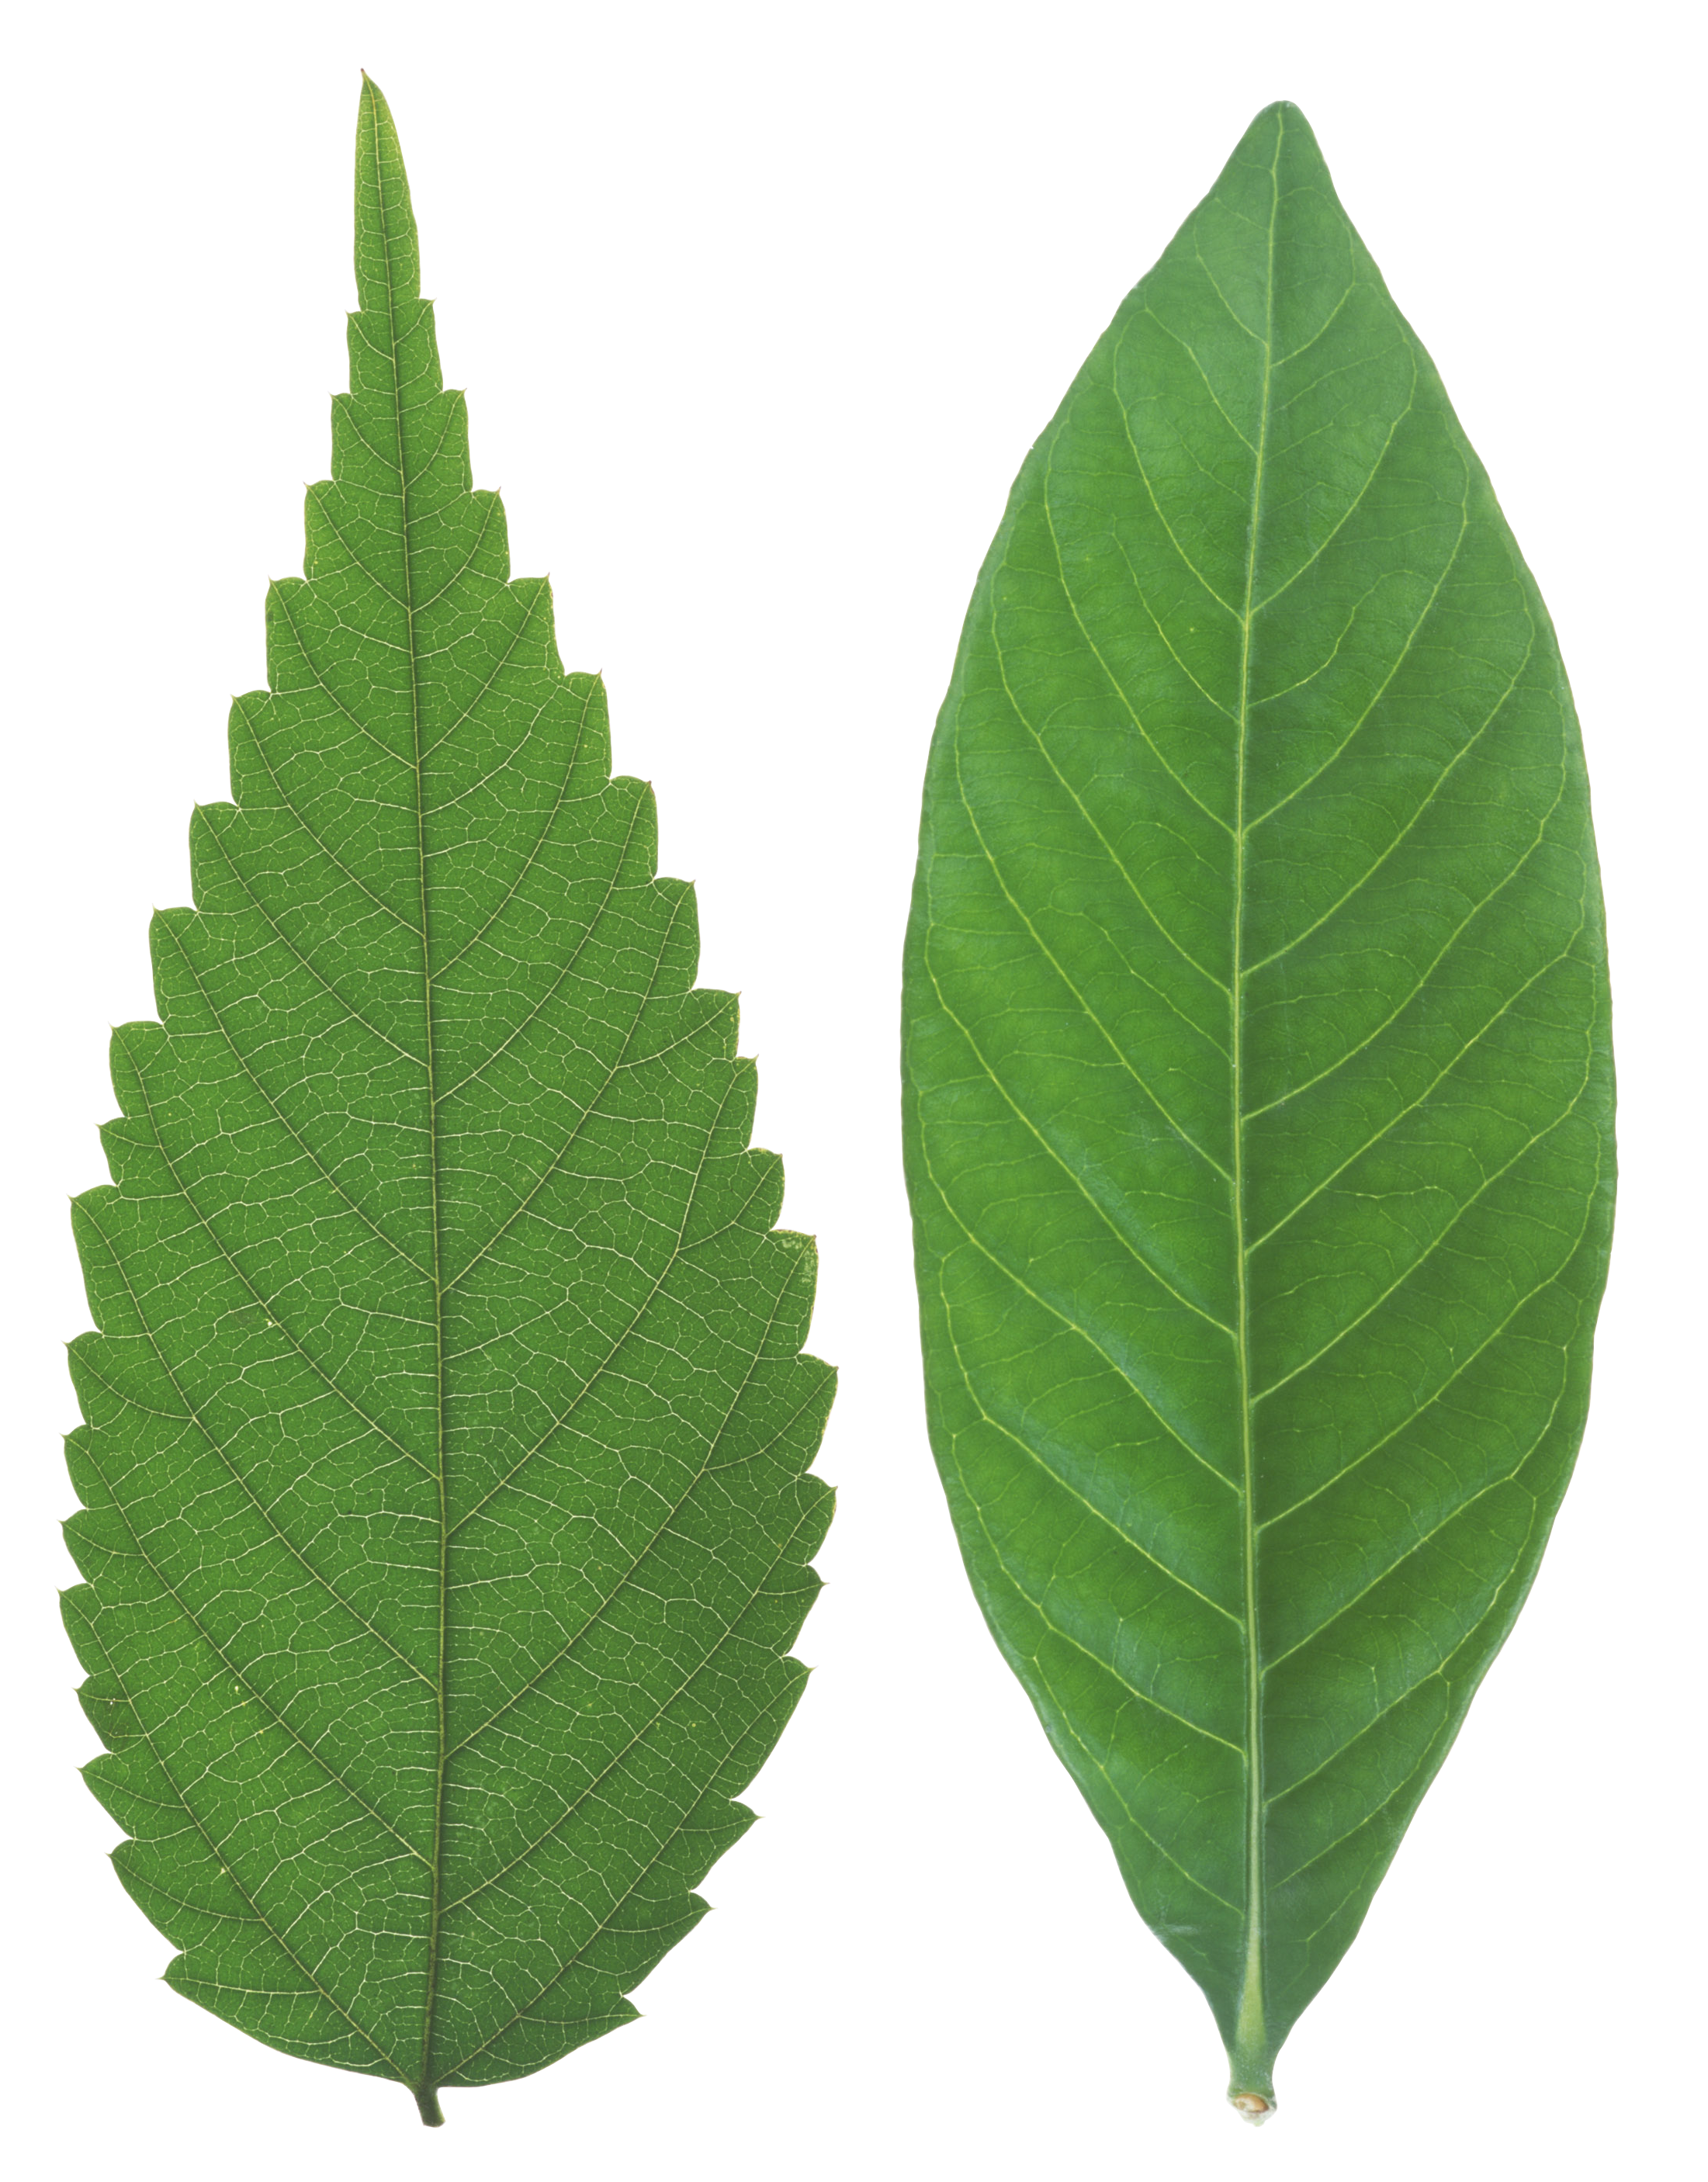 Green Organic Leafs Photos Free Download PNG HQ PNG Image